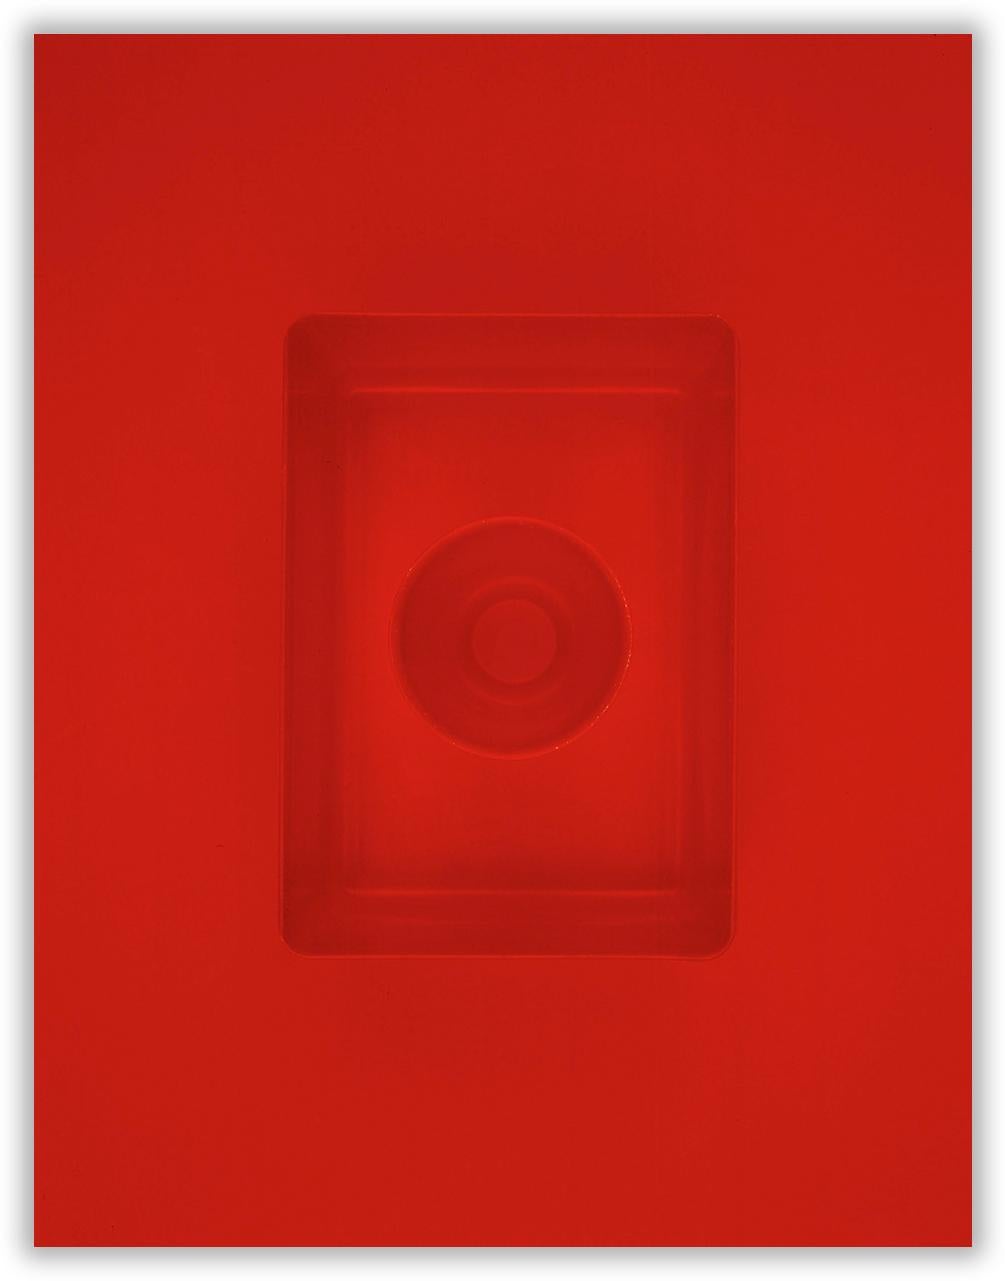 Red Box (Abstract Photography)
C print - Unframed.

"Edition of 5 + 2AP, next 1/5
Richard Caldicott is most well known for this earlier work series which used Tupperware containers as the subject for his photographs.
As he describes : ""Tupperware